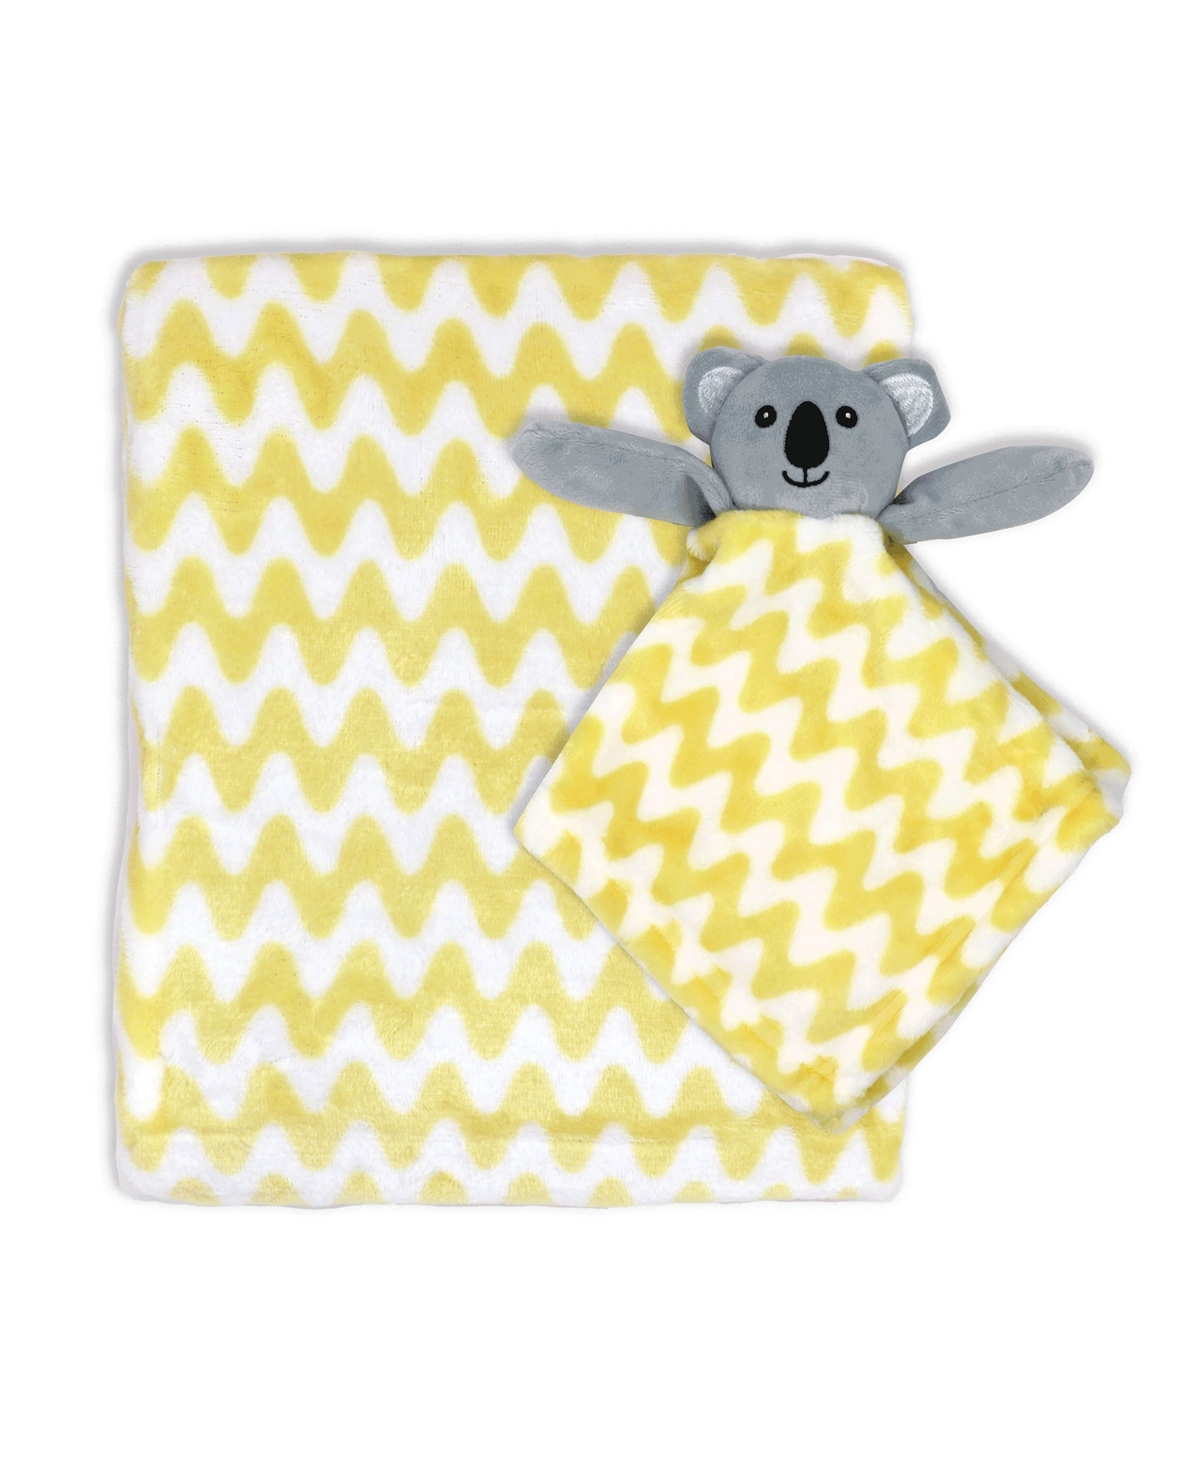 3 Stories Trading Baby Boys Or Baby Girls Blanket And Nunu, 2 Piece Set In Yellow Chevron